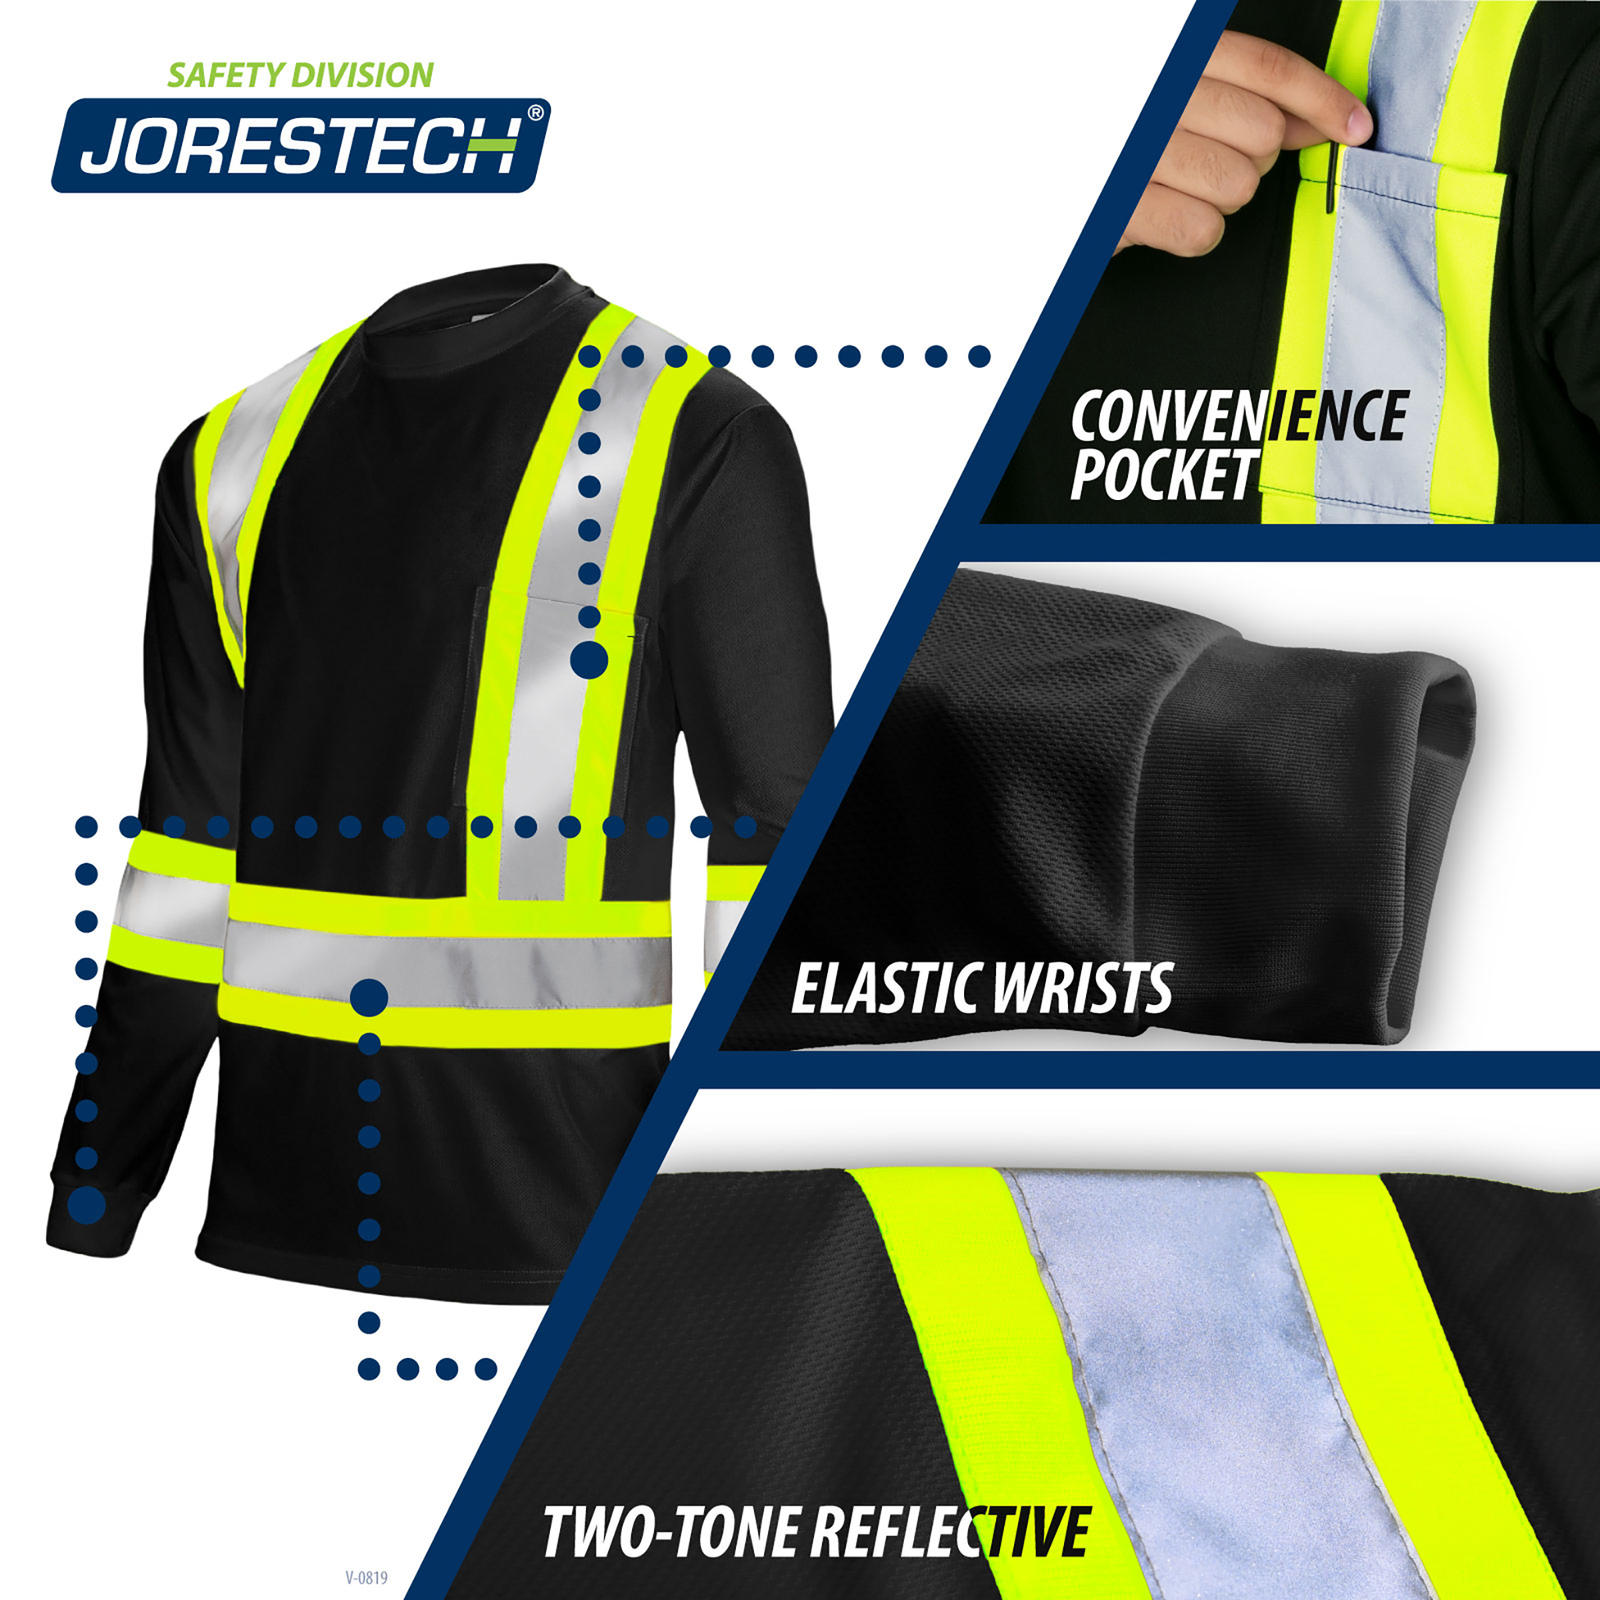 The JORESTECH HI-Vis safety shirt is shown plus close ups of the pocket, the sleeve cuff and the two tone reflective strips that read: Convenience chest pocket, two tone reflective